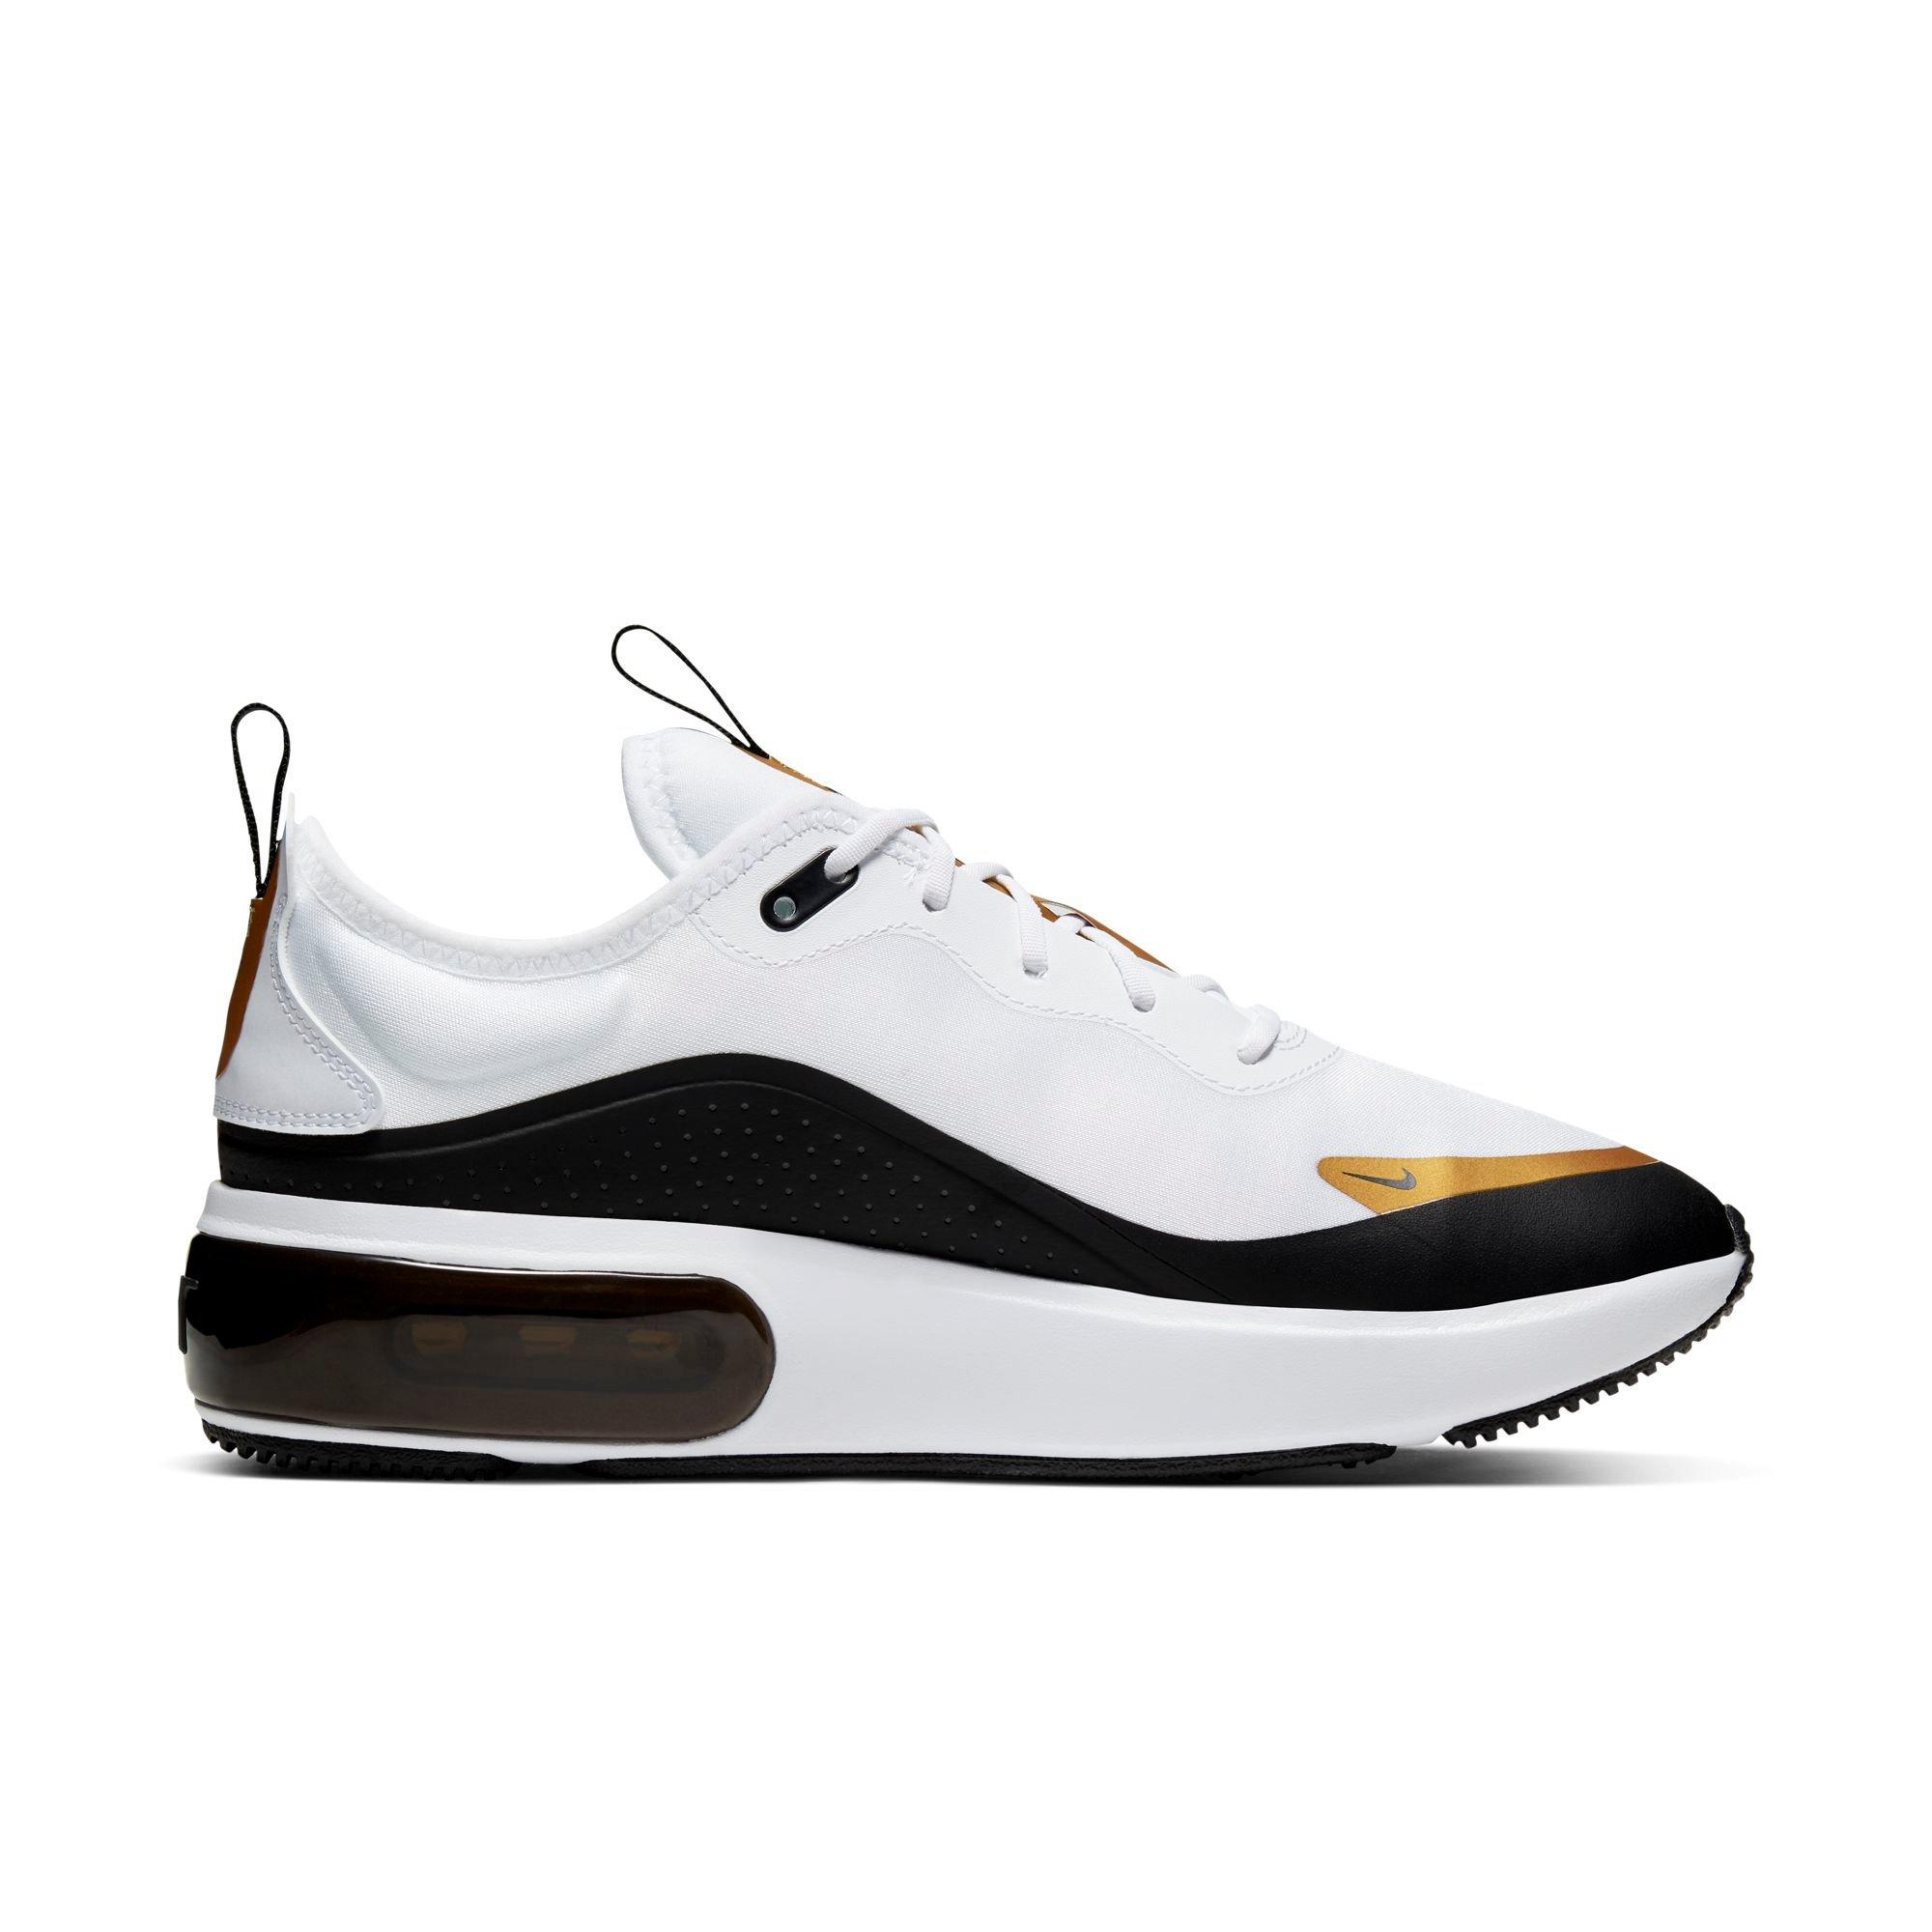 nike air max white and gold womens